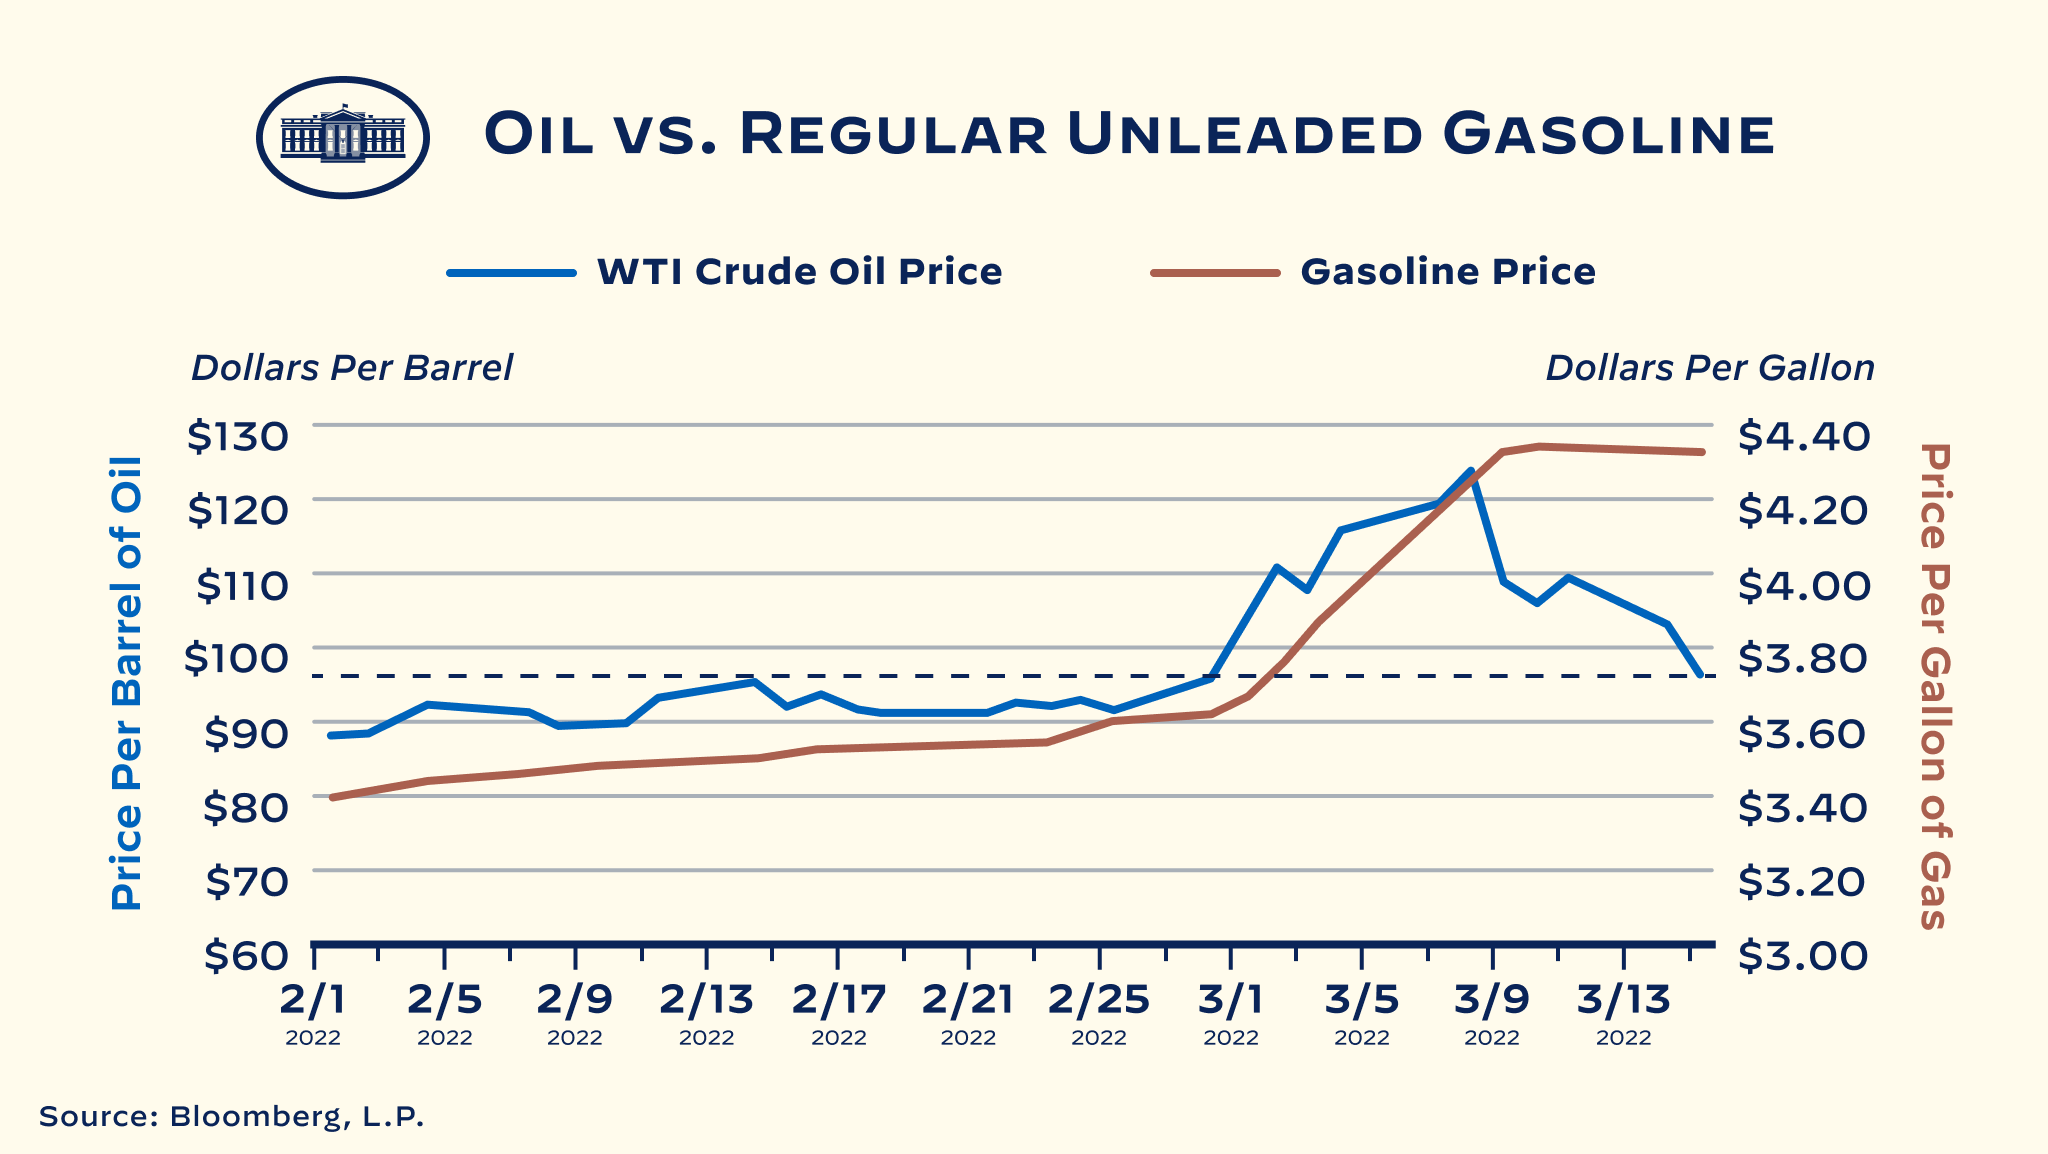 A chart showing the oil price and the gasoline price on a single chart with 2 y axes. Red and blue are used to communicate what line should be read from which axis